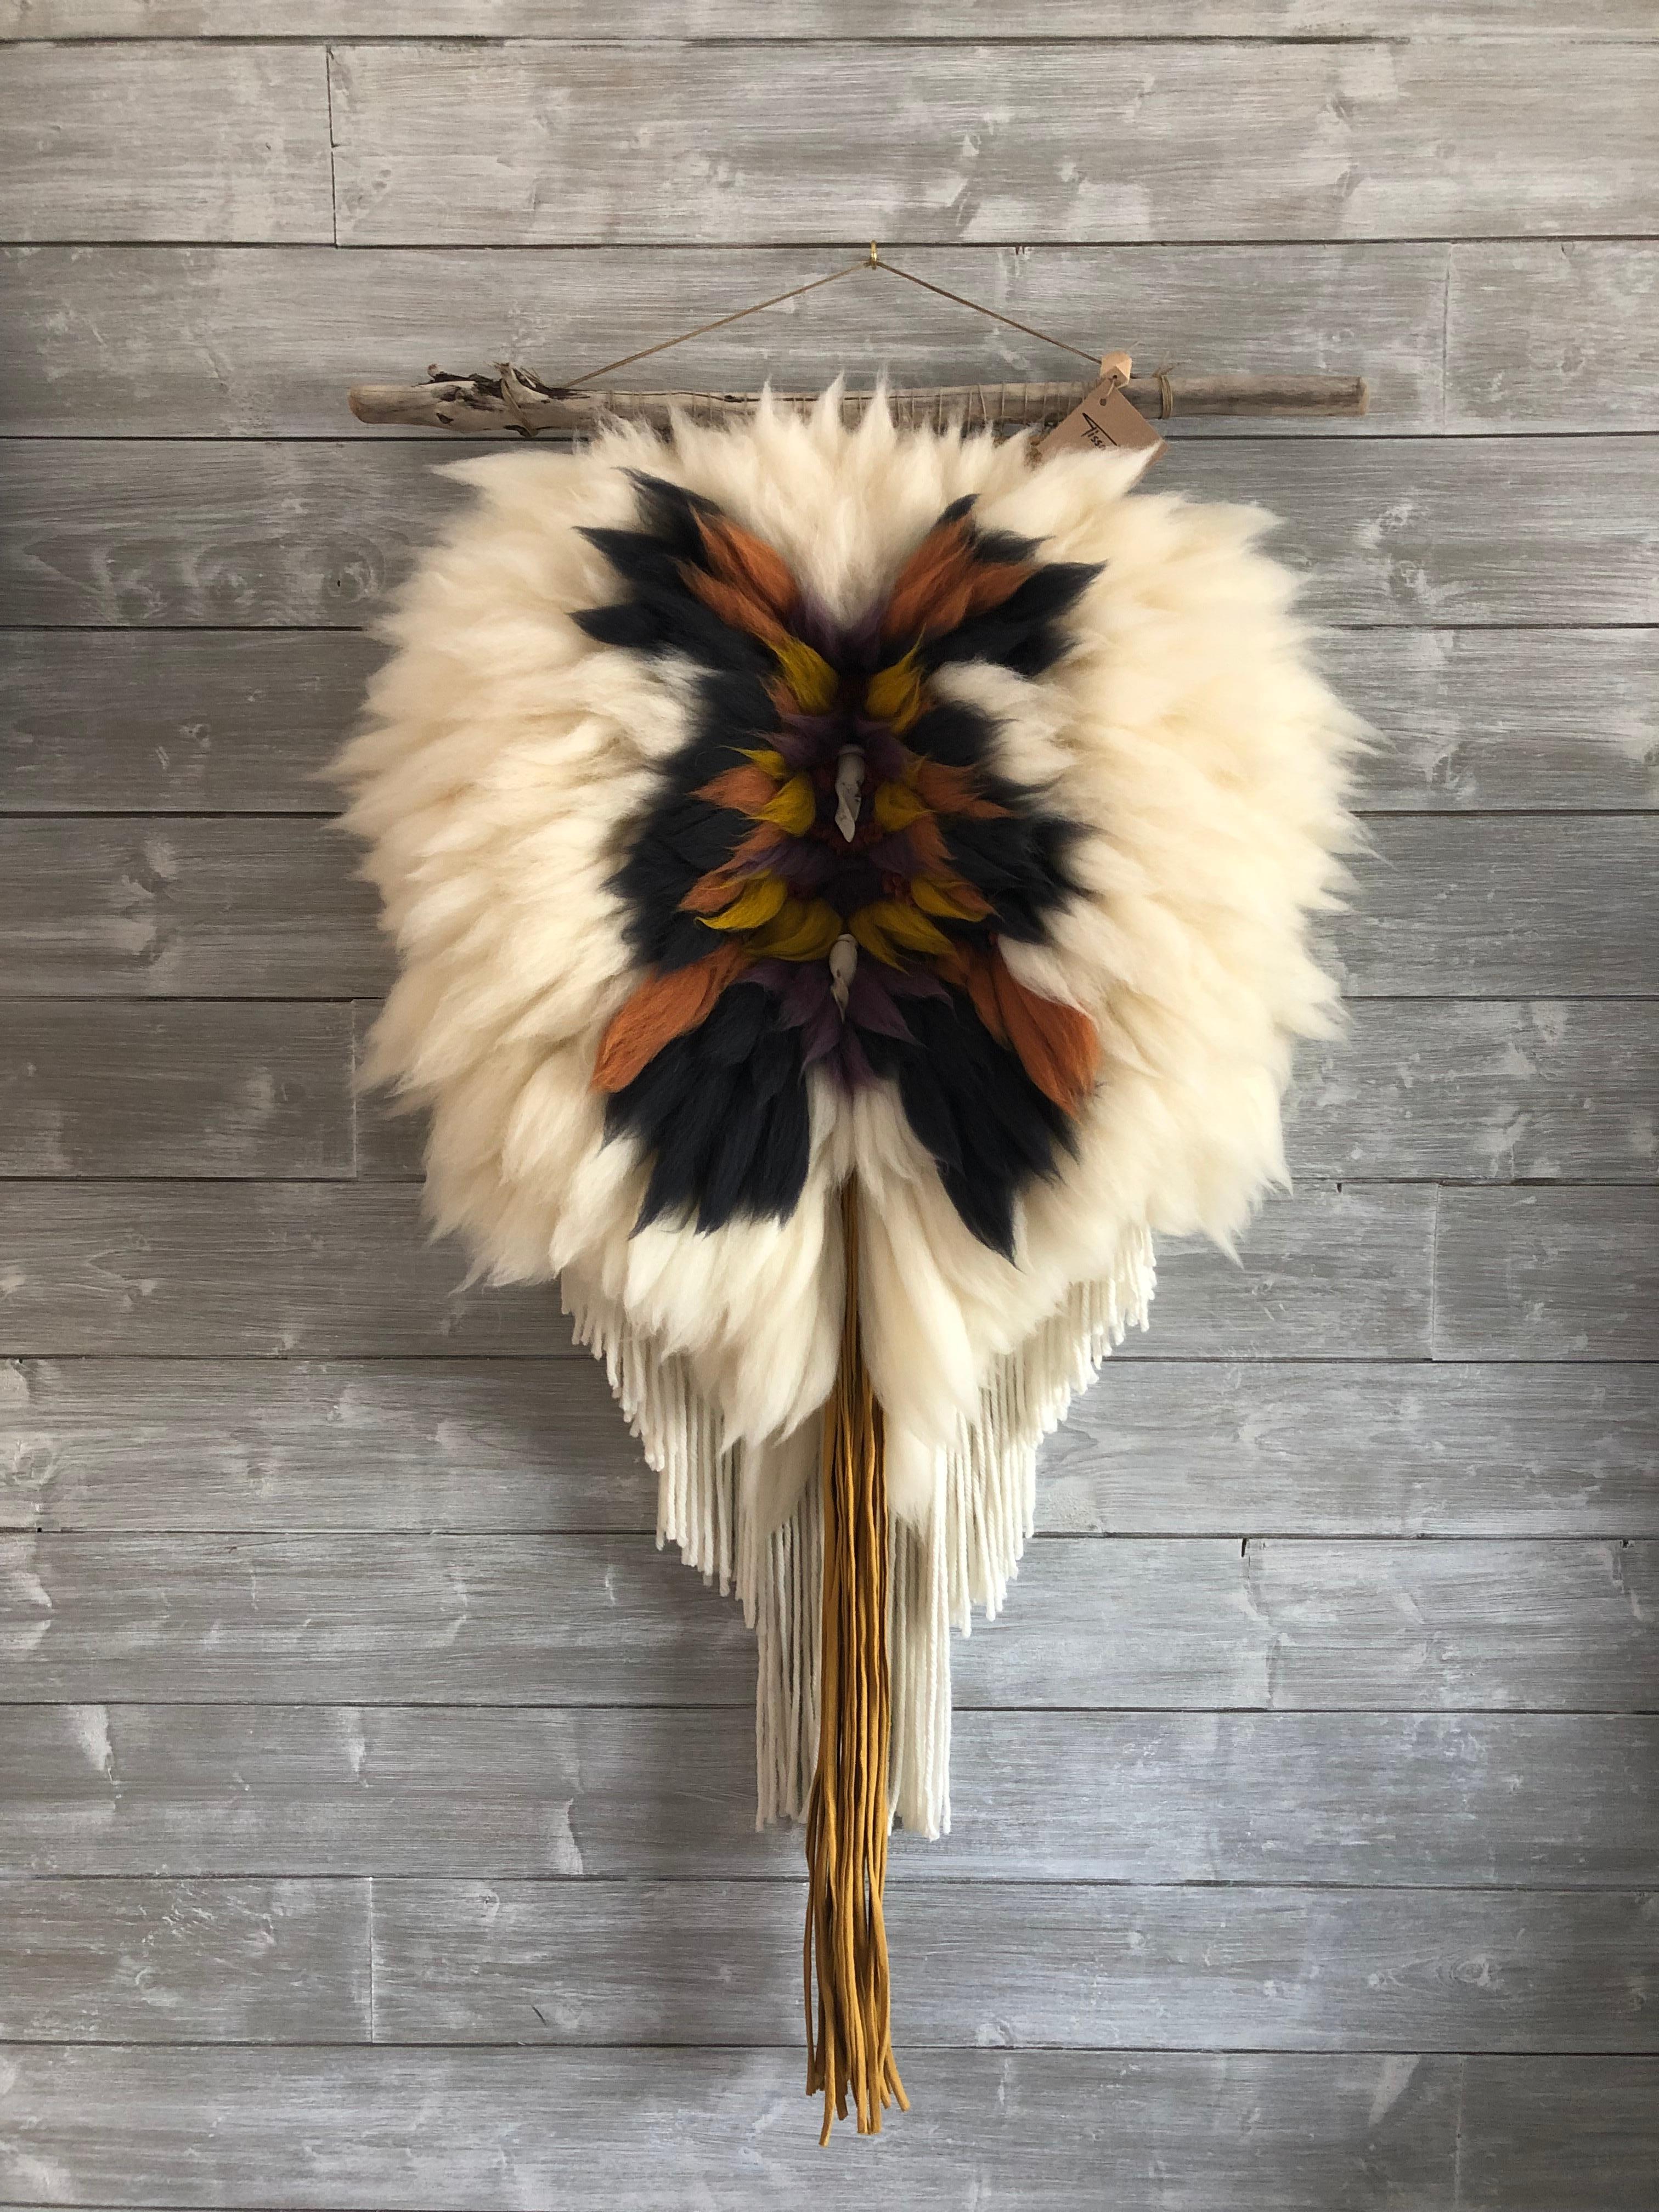 Handsome handcrafted wall hanging is an explosion of autumn colors made of carded wool and wool yarn (alpaca & merino). It features ceramic pearls and dangling fringe of recycled cotton. The piece is suspended from a branch of drift wood for elegant